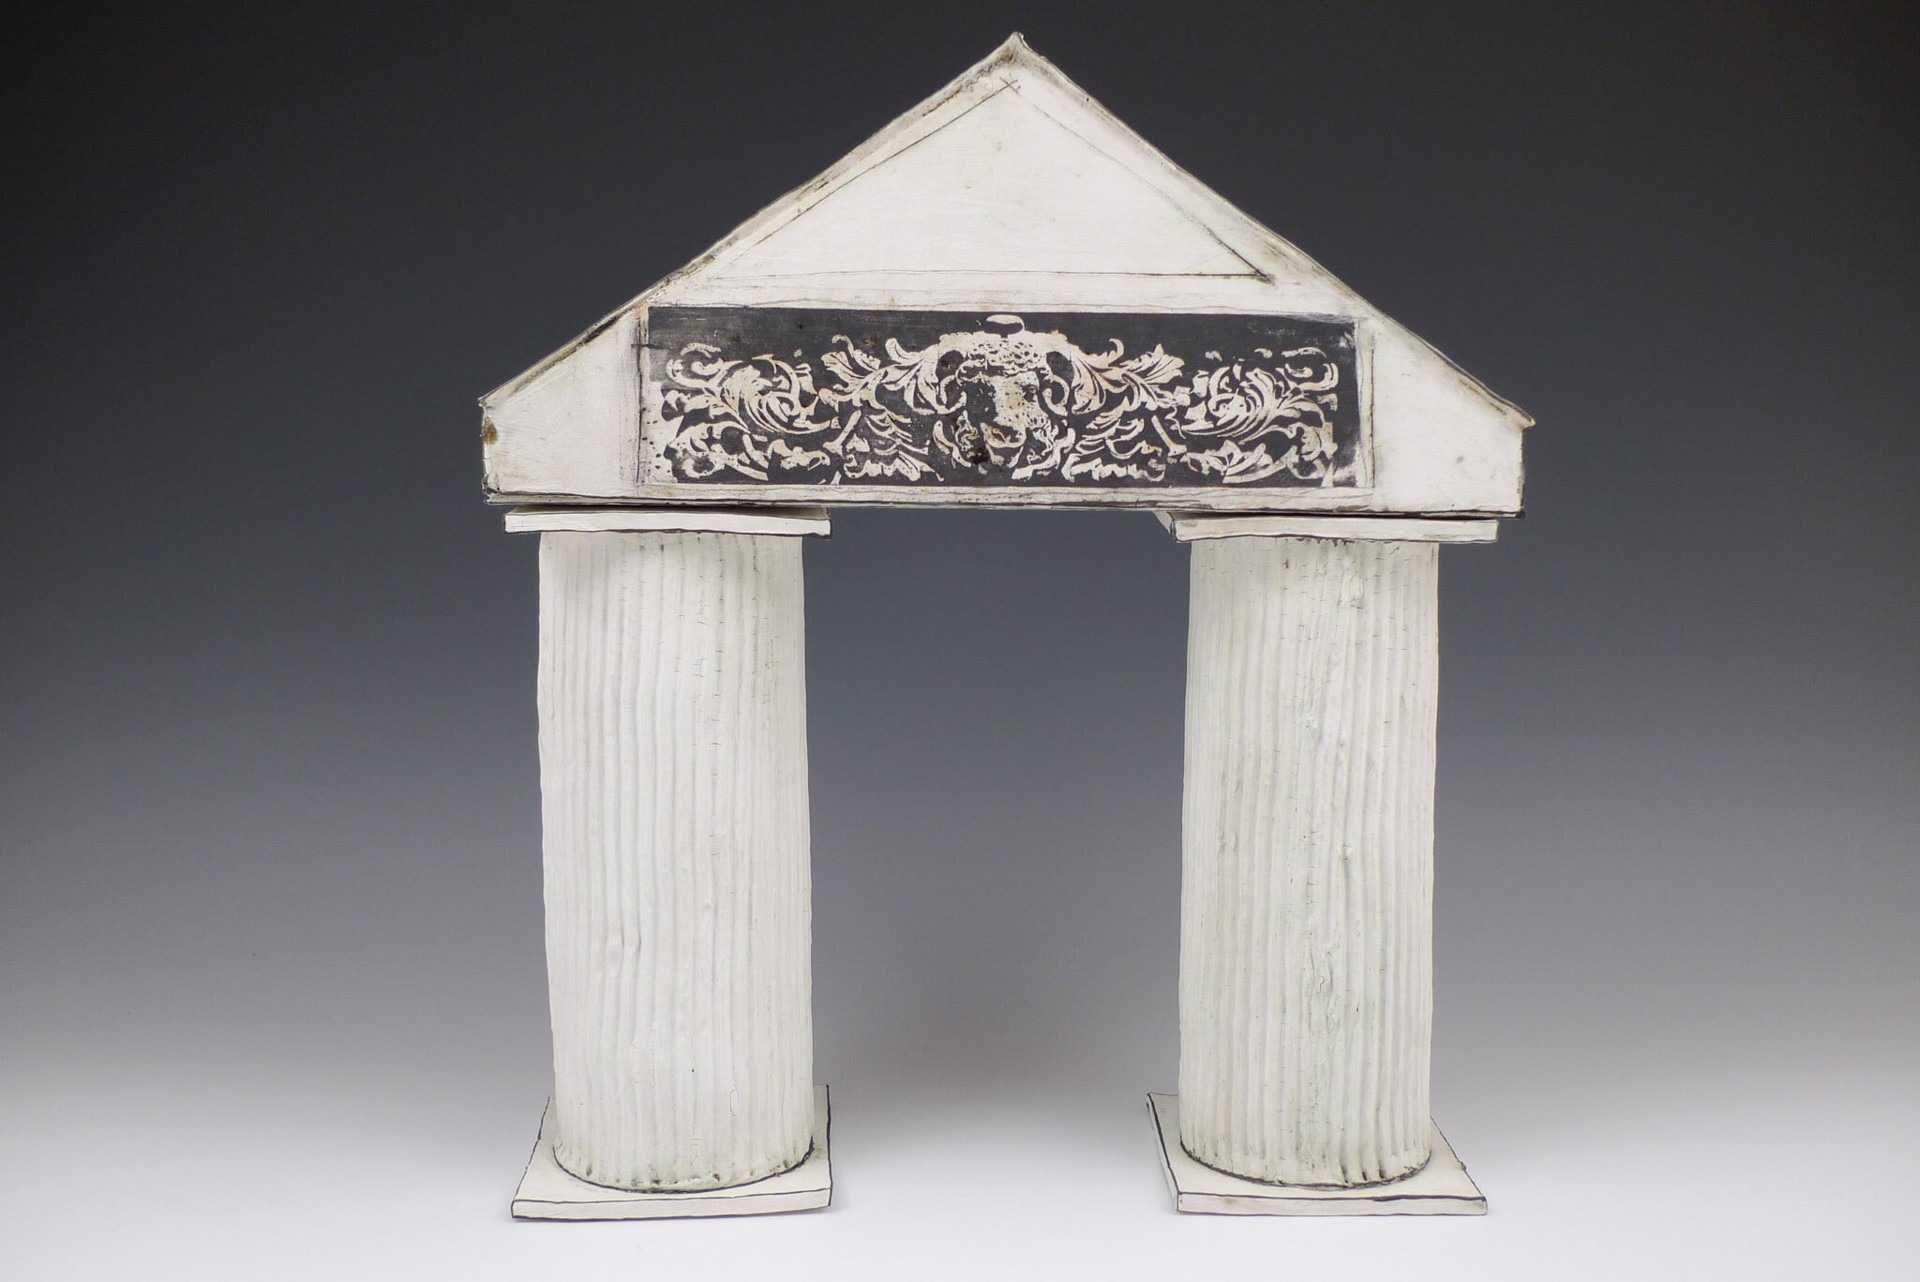 Two Pillar Portico by Mary Fischer